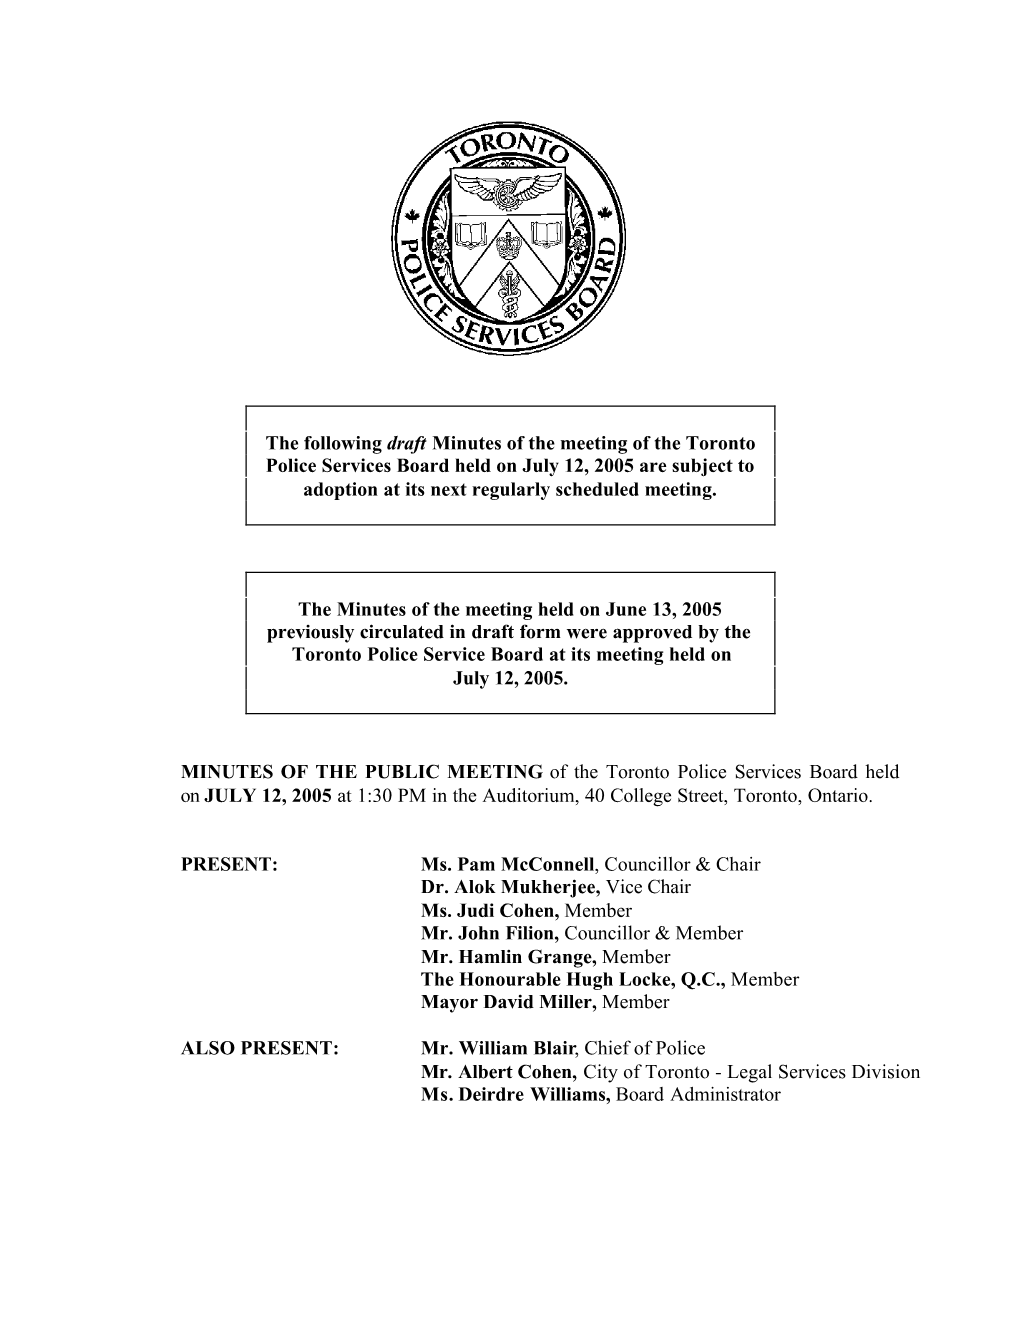 The Following Draft Minutes of the Meeting of the Toronto Police Services Board Held on July 12, 2005 Are Subject to Adoption at Its Next Regularly Scheduled Meeting